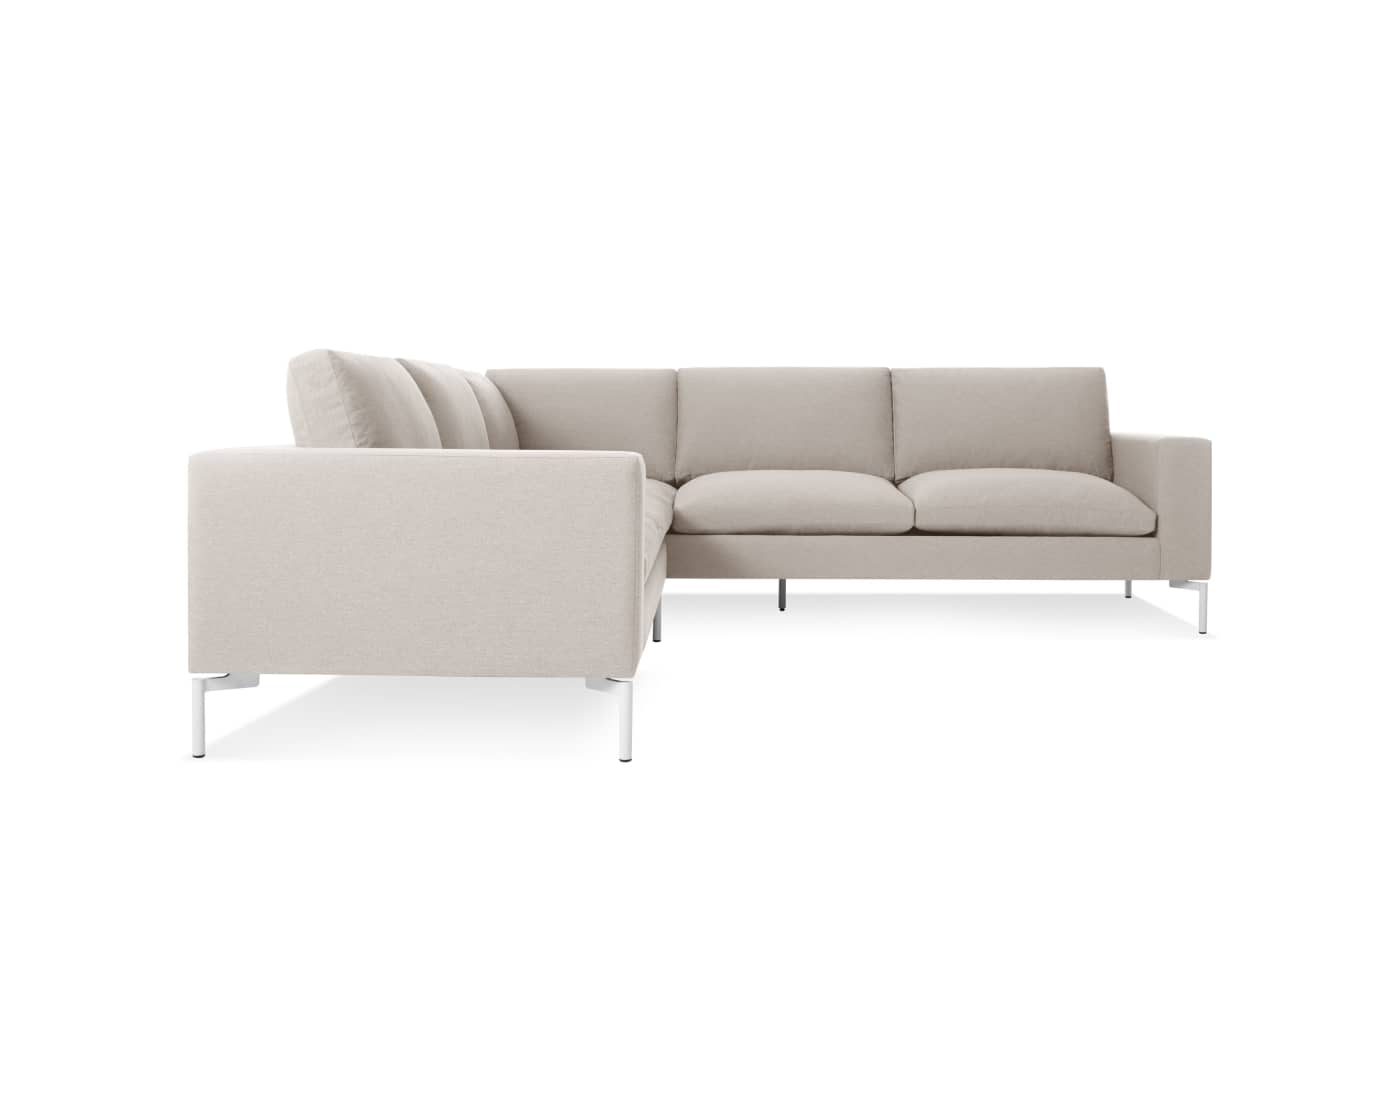 New Standard Sectional Sofa - Small